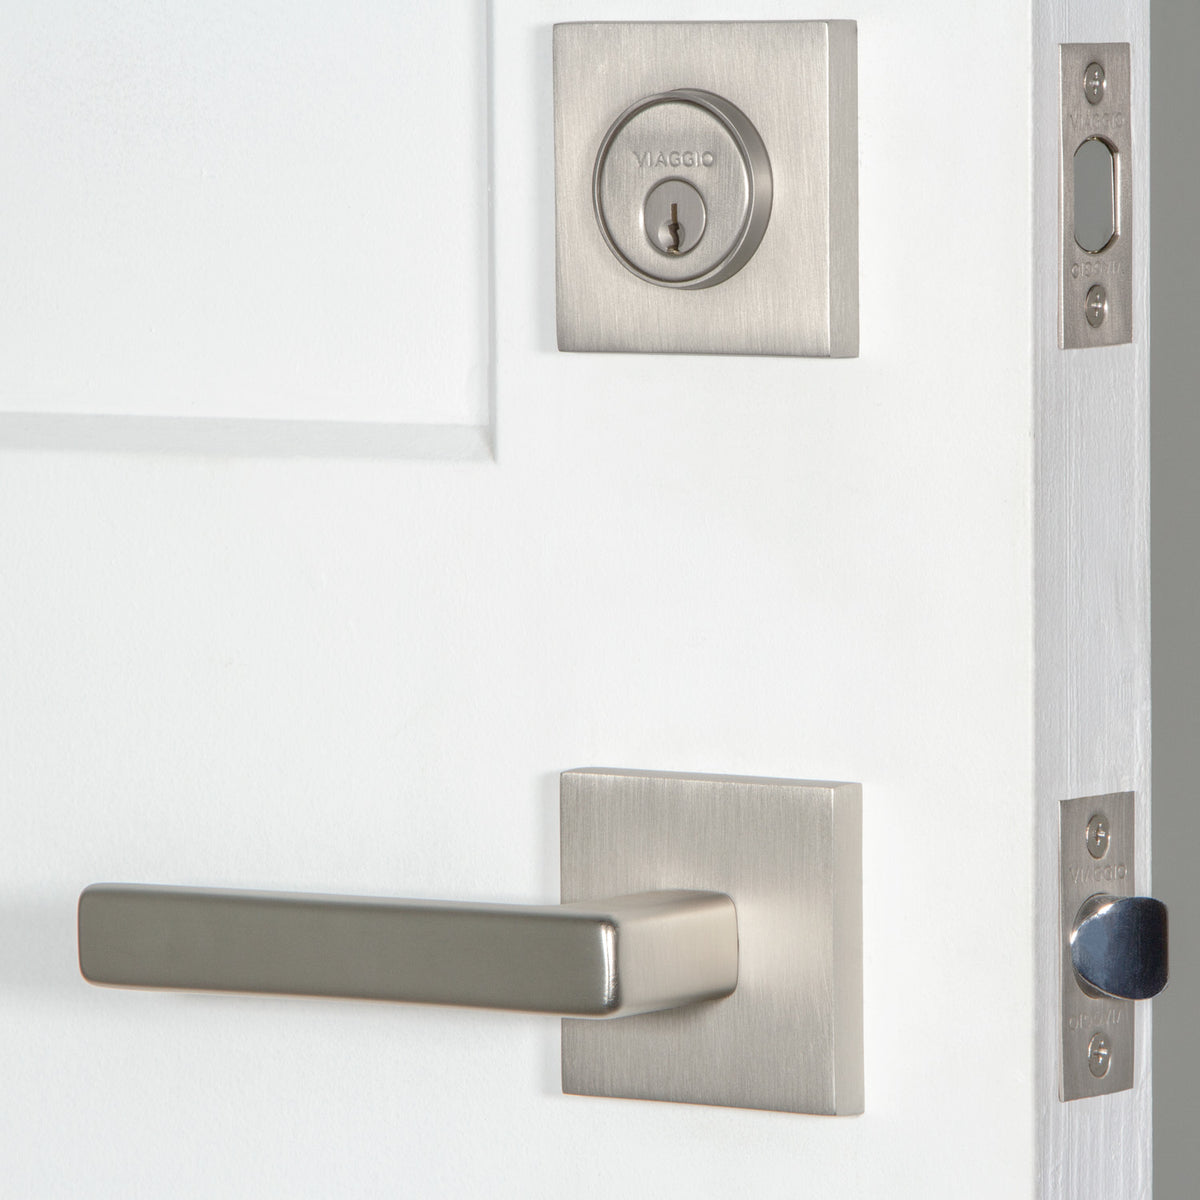 Quadrato Rosette Entry Set with Lusso Lever in Satin Nickel